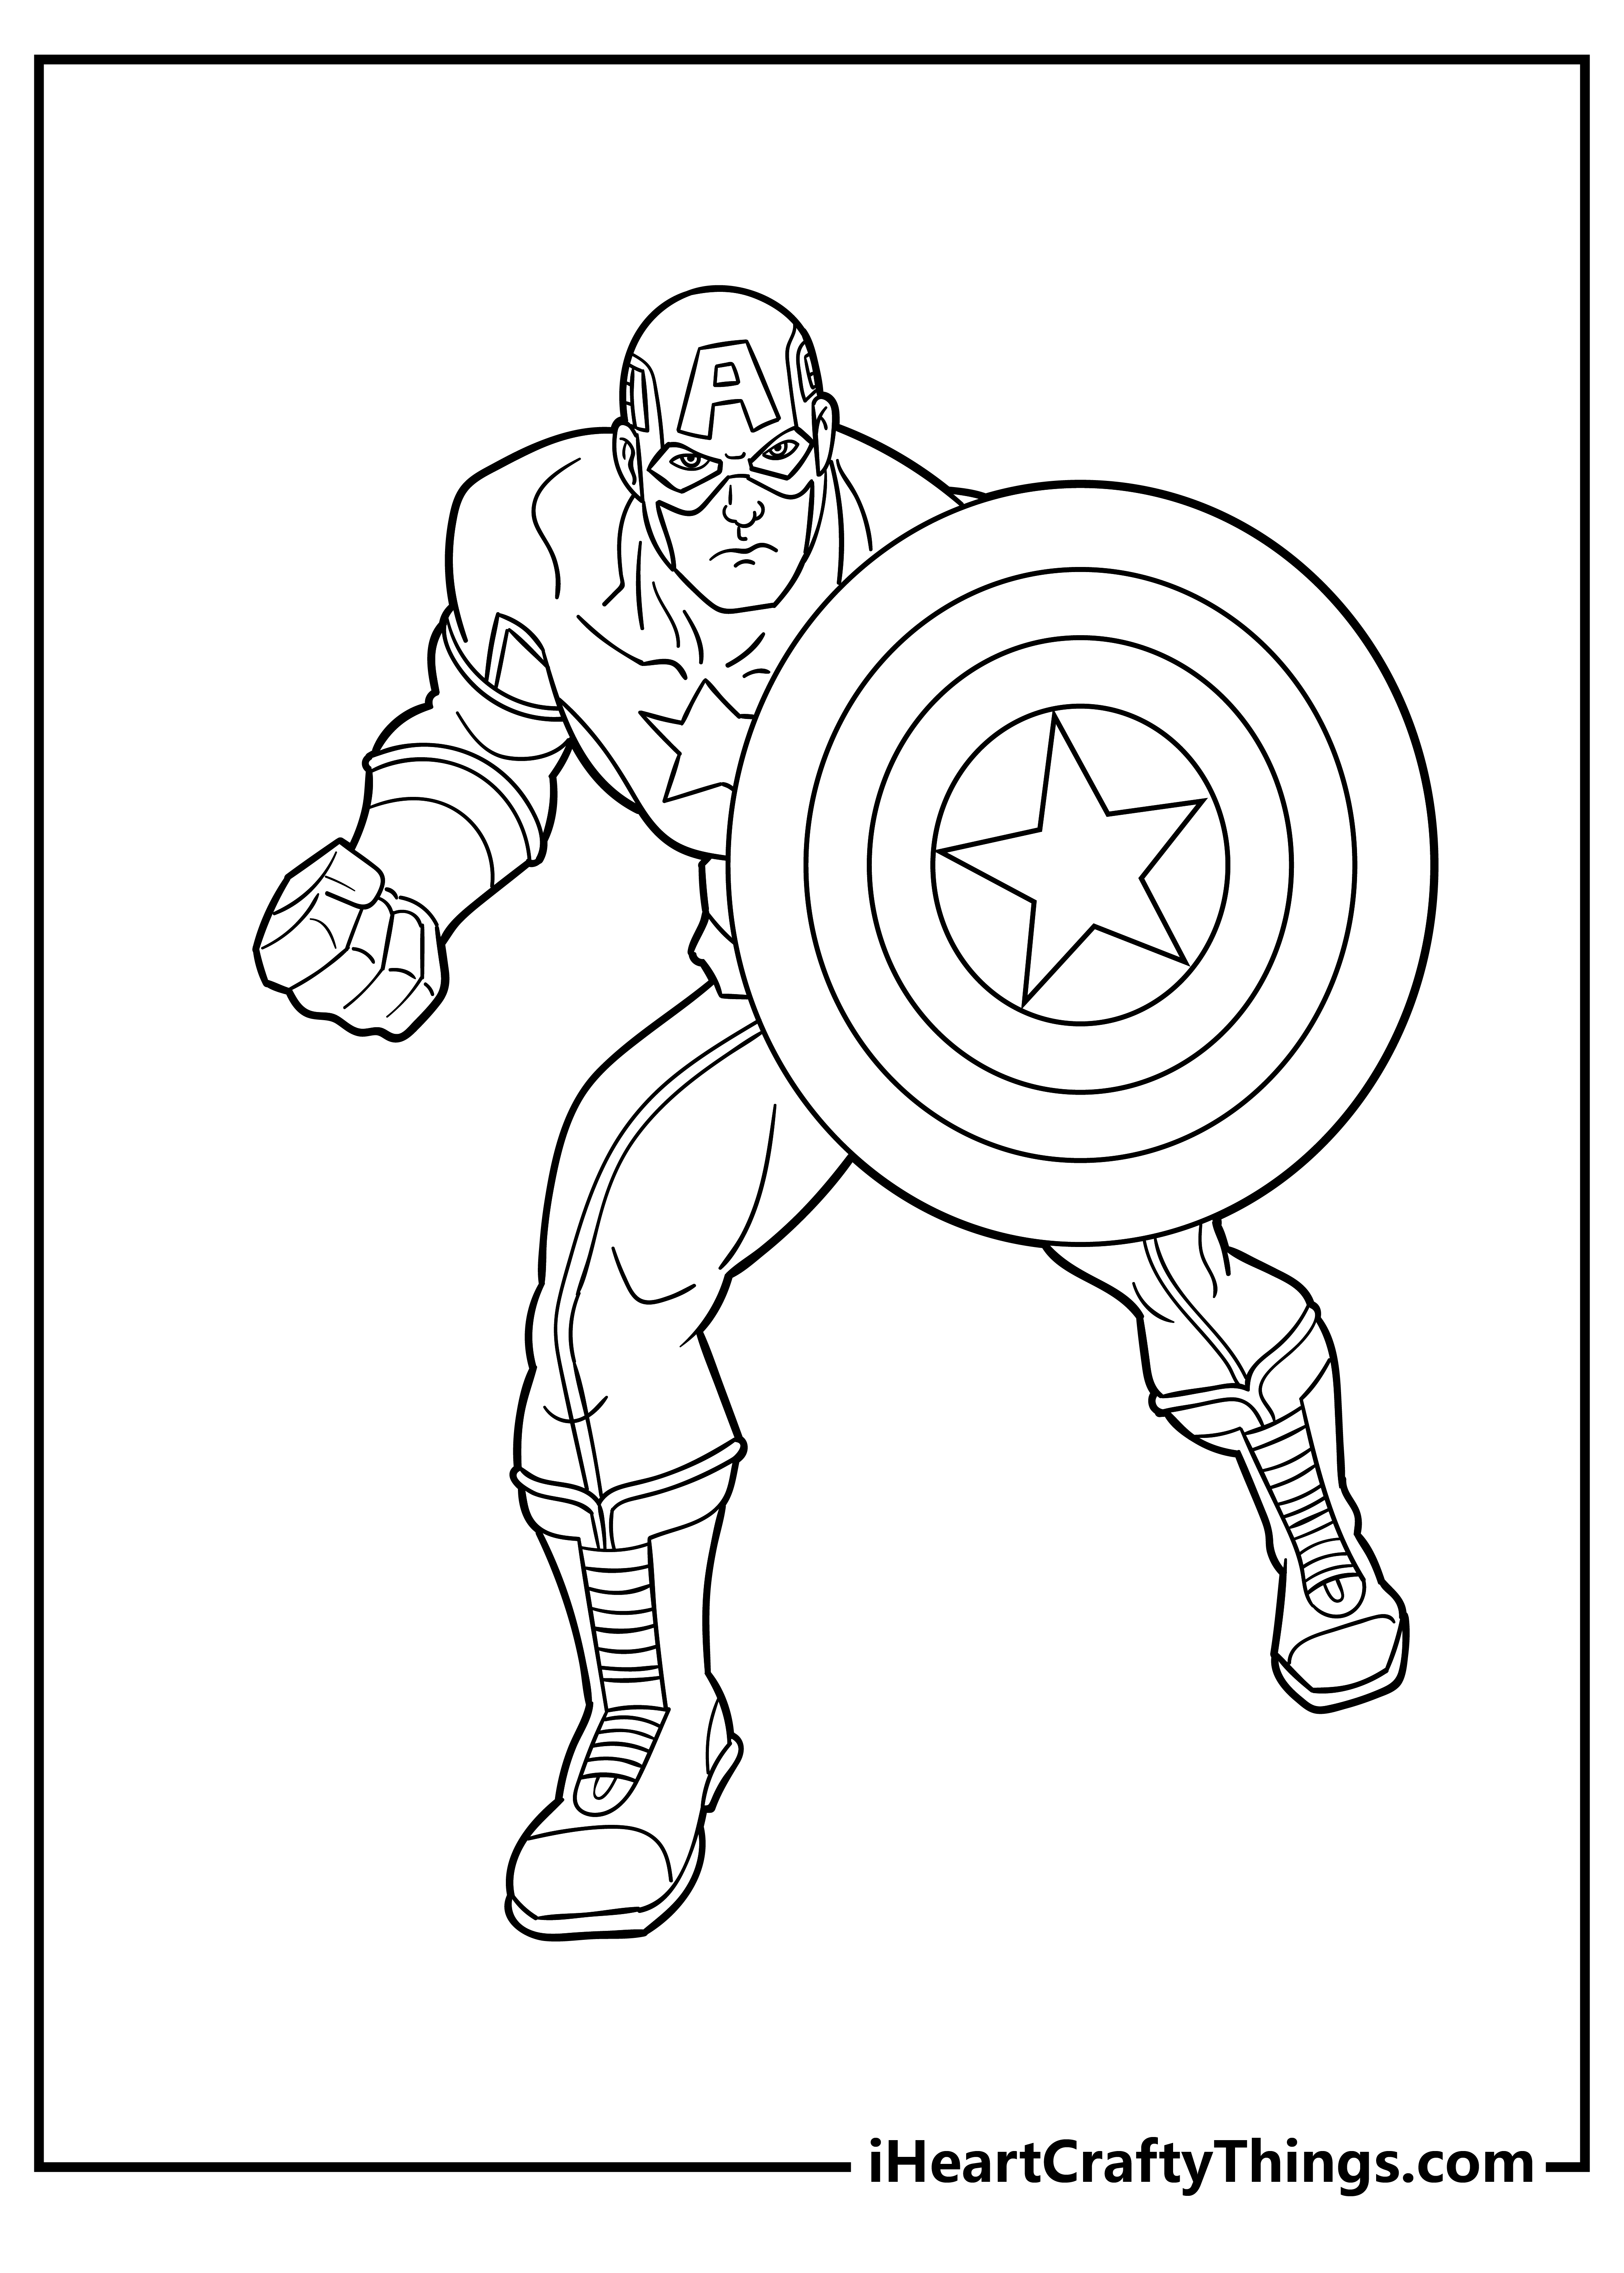 Avengers Coloring Pages for adults free printable